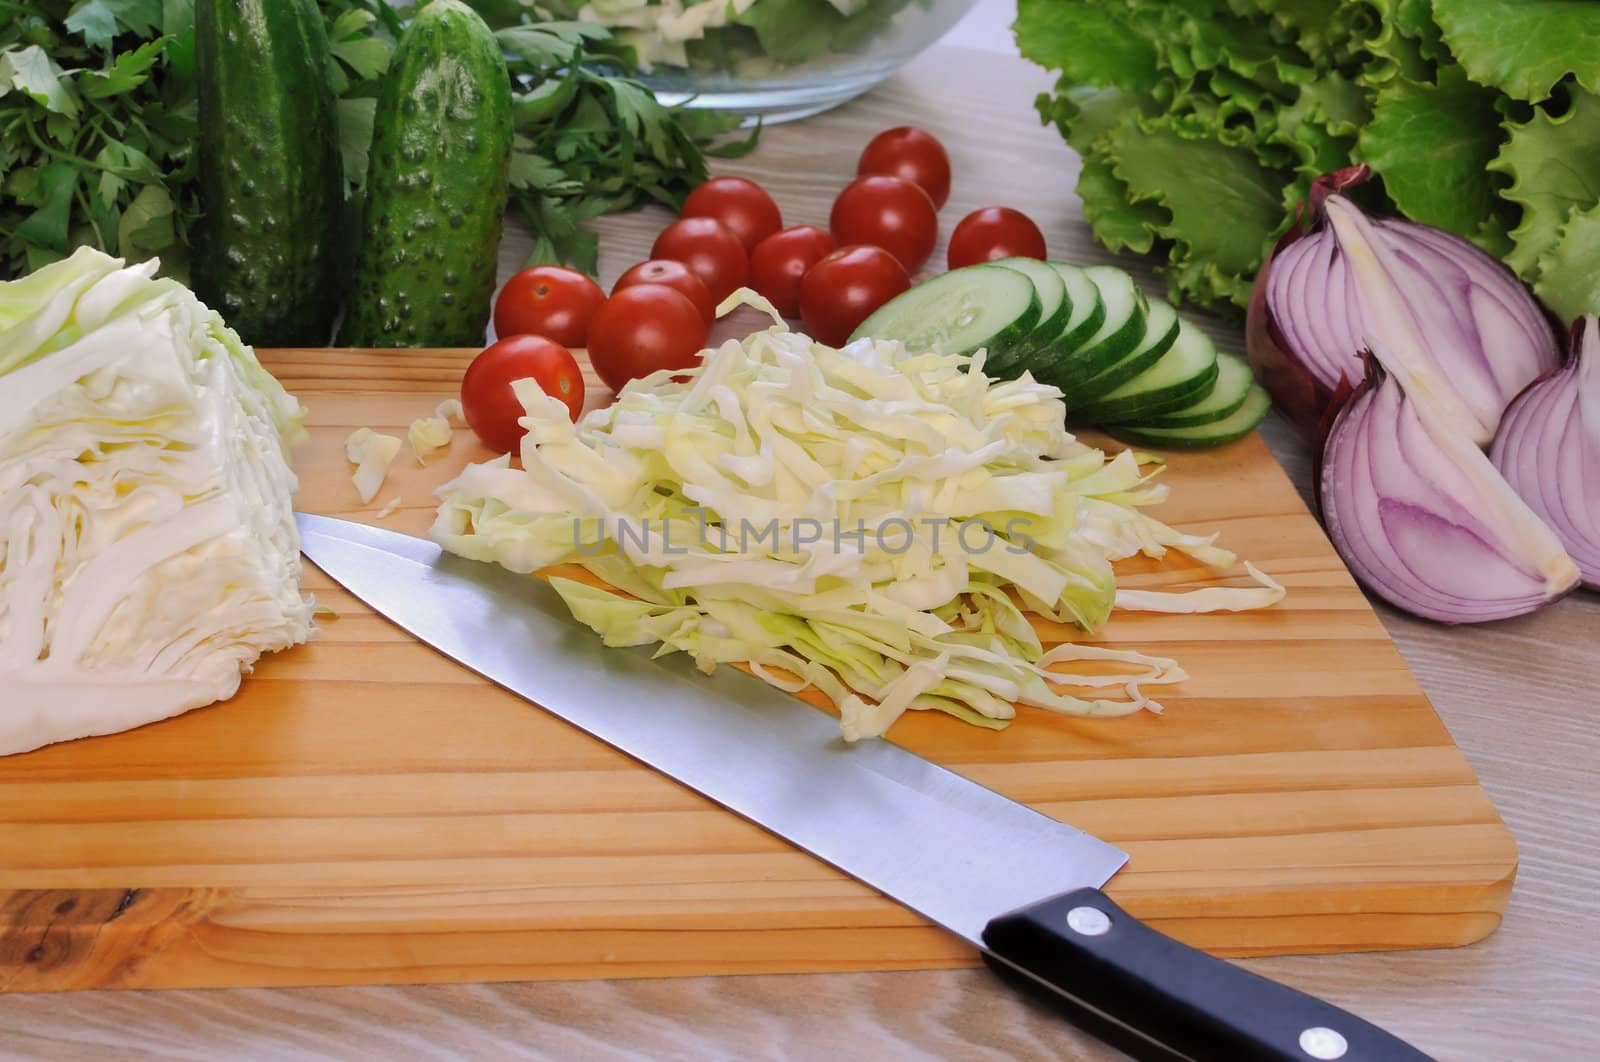 Ingredients for salad vegetables by Apolonia